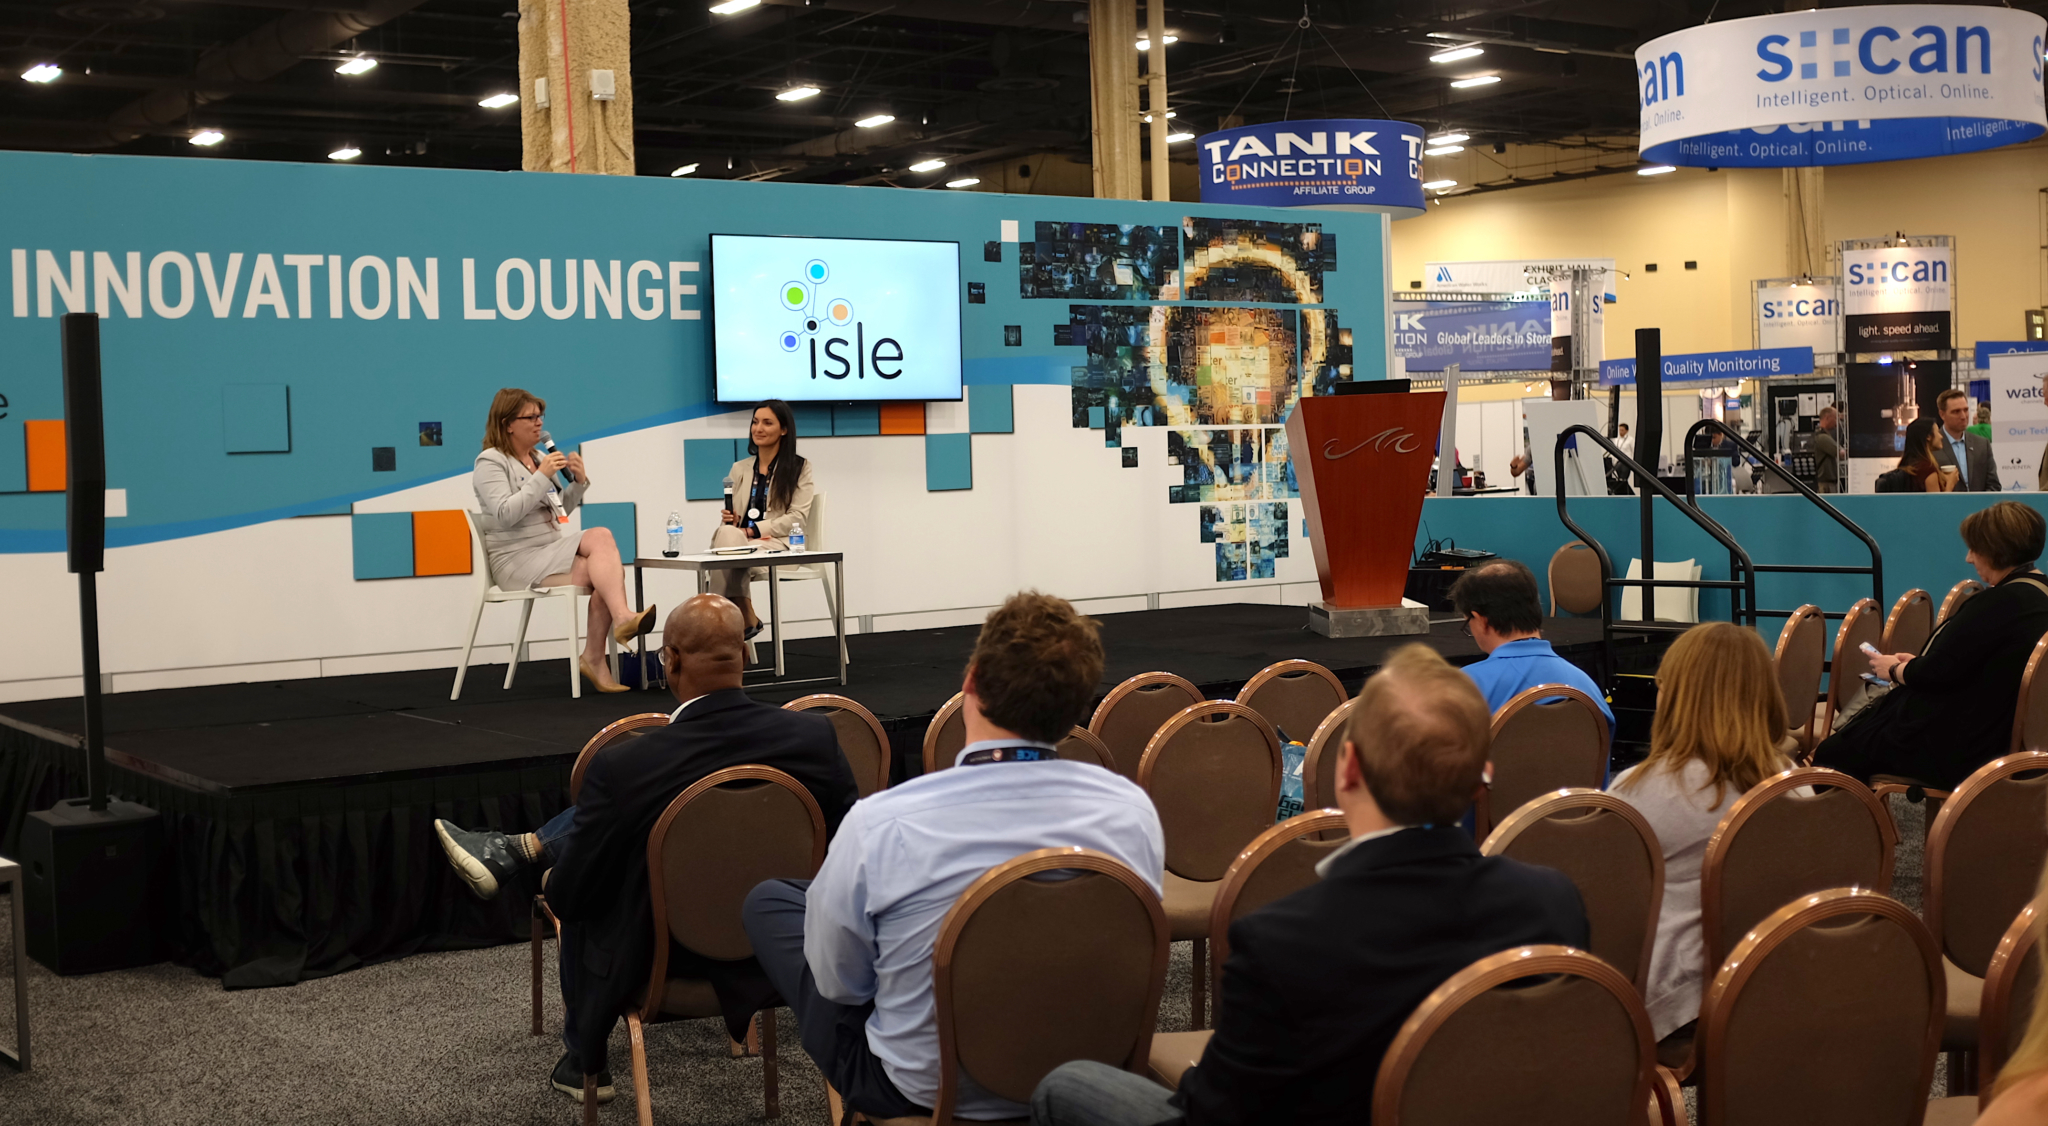 The Innovation Lounge at ACE18 was a hot spot for informative presentations and sharing ideas in the water sector